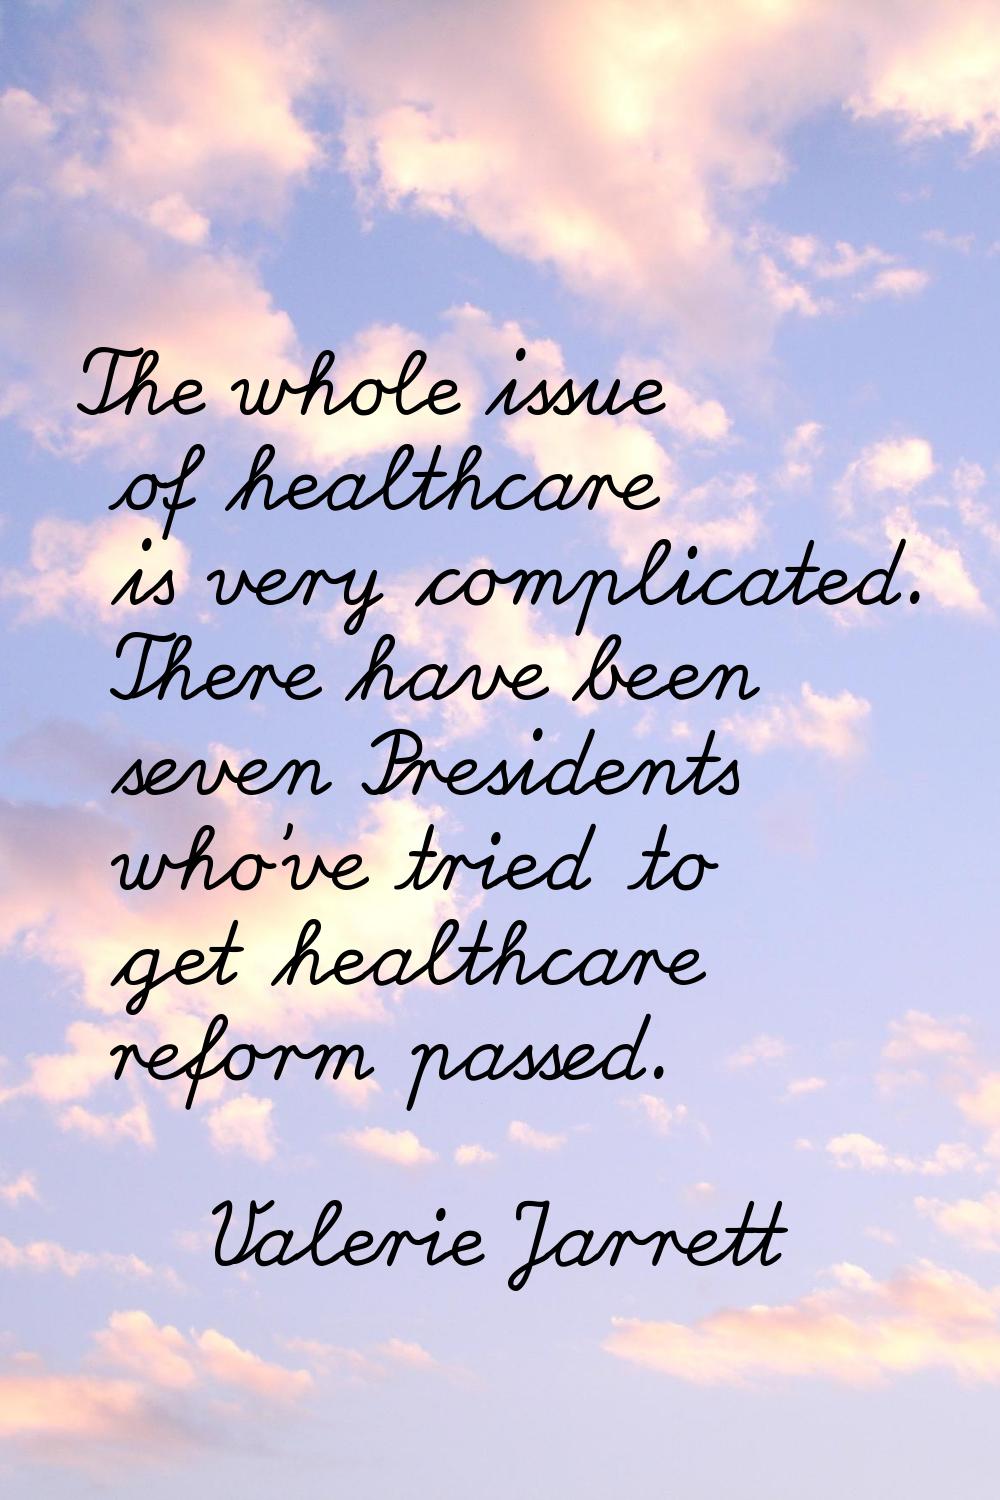 The whole issue of healthcare is very complicated. There have been seven Presidents who've tried to